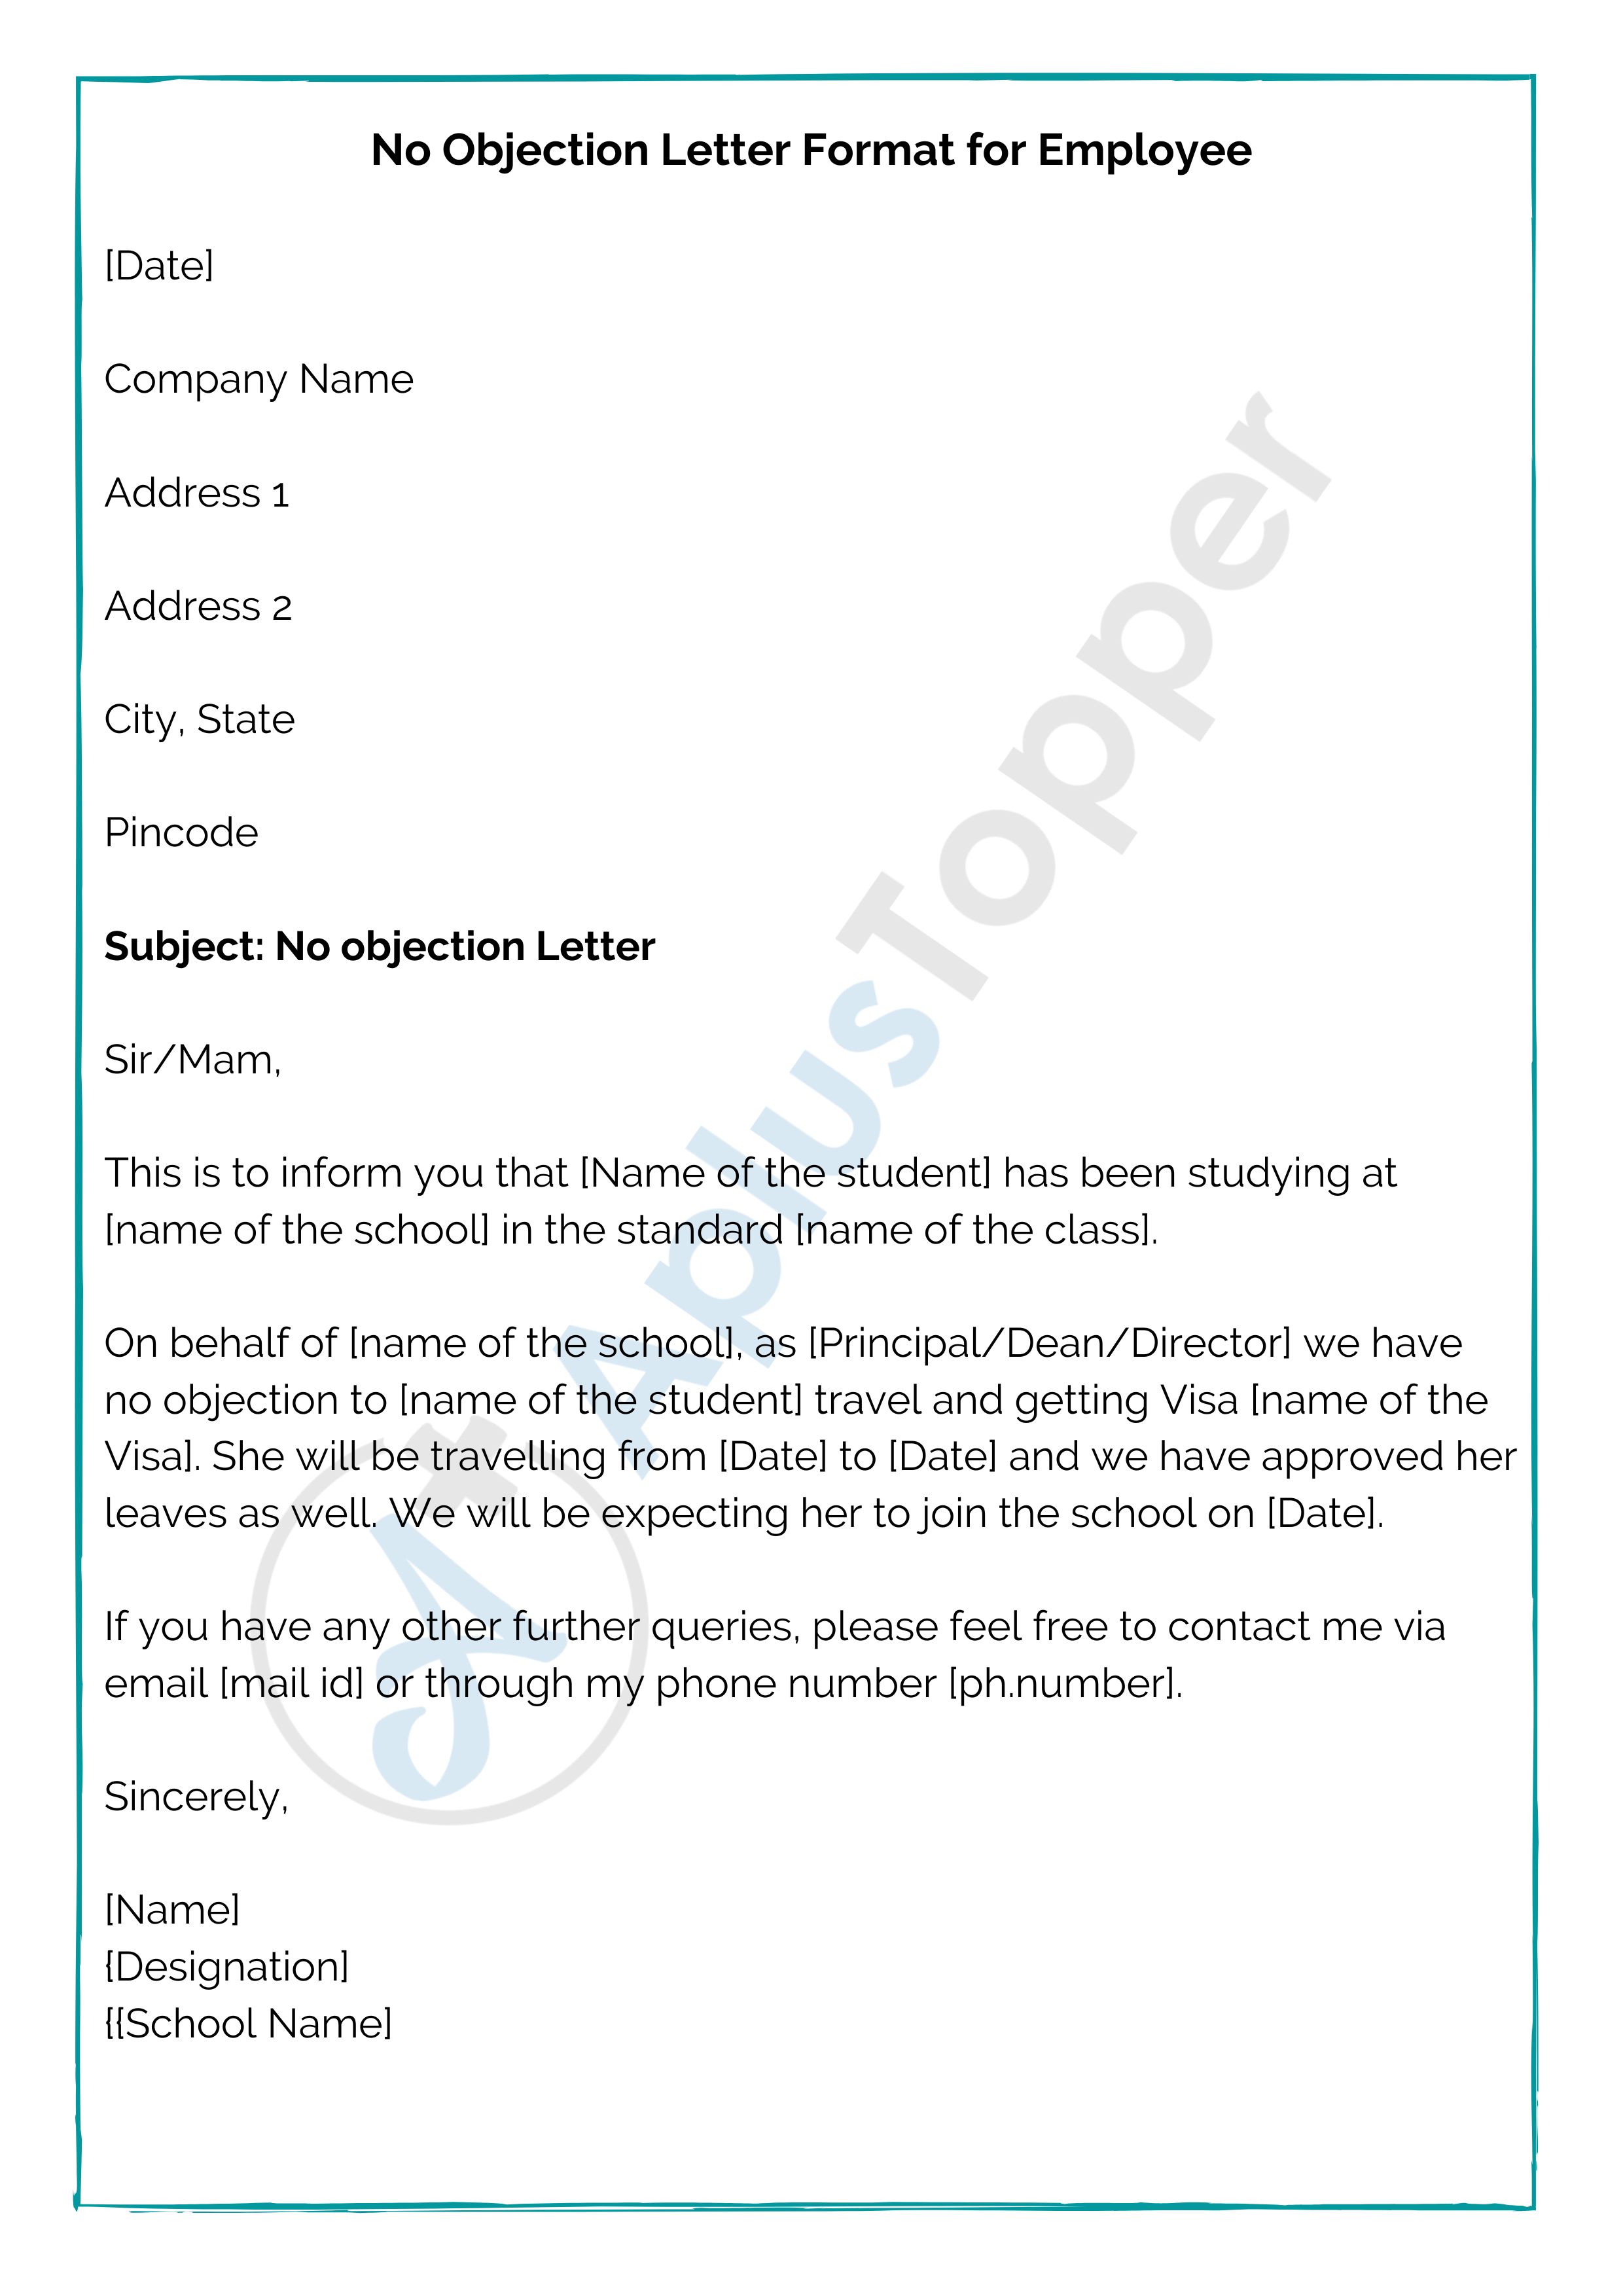 No Objection Letter  Format, Samples, How To Write No Objection